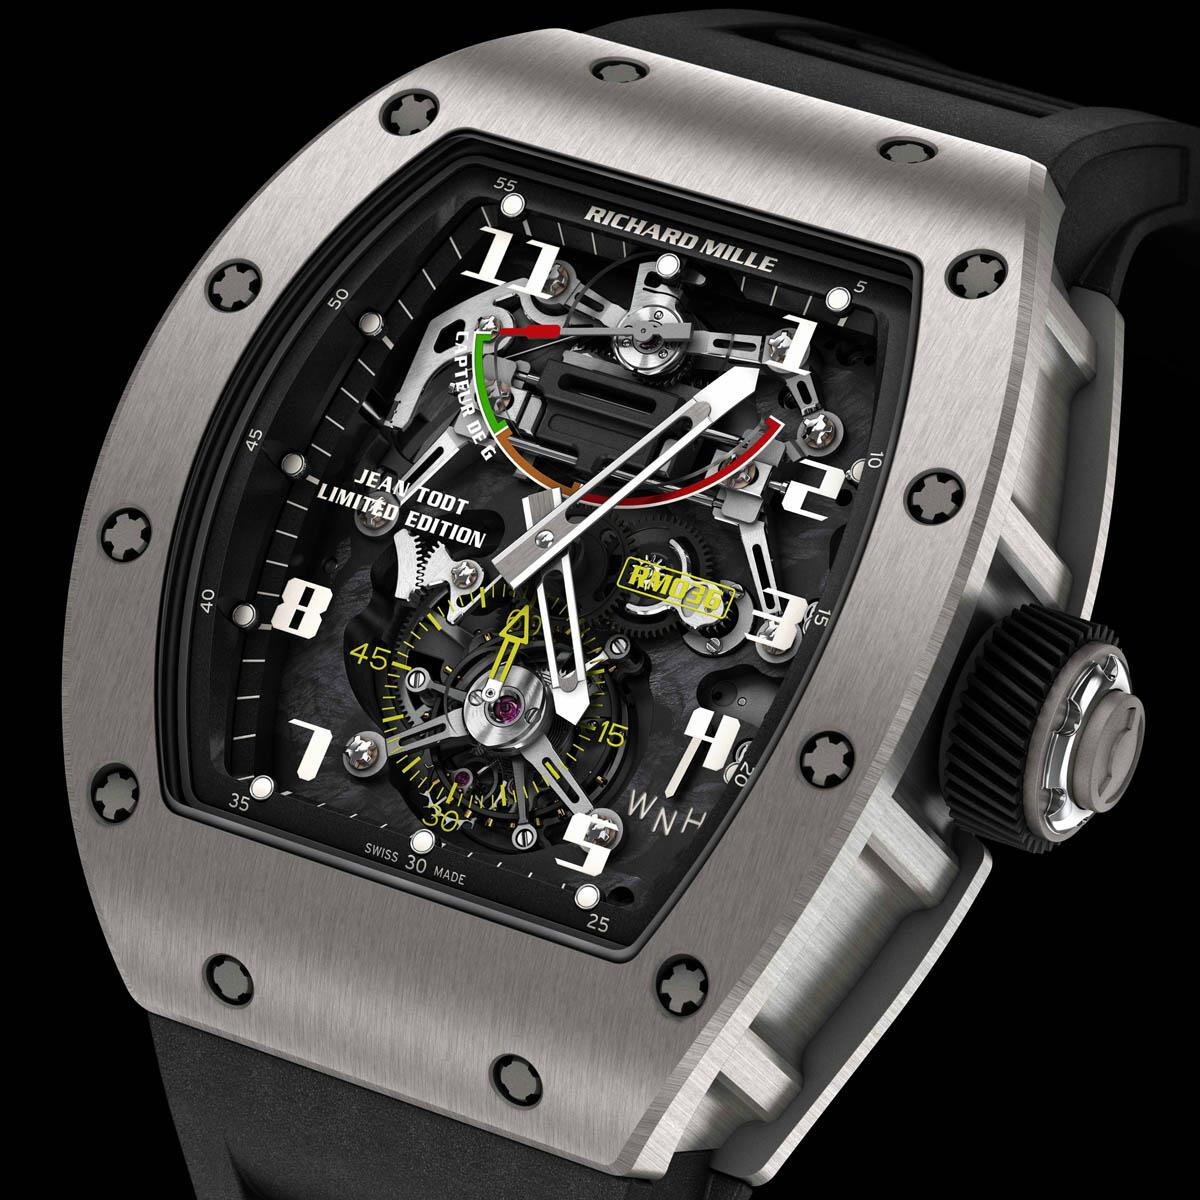 Richard Mille RM 056 Replica Watches